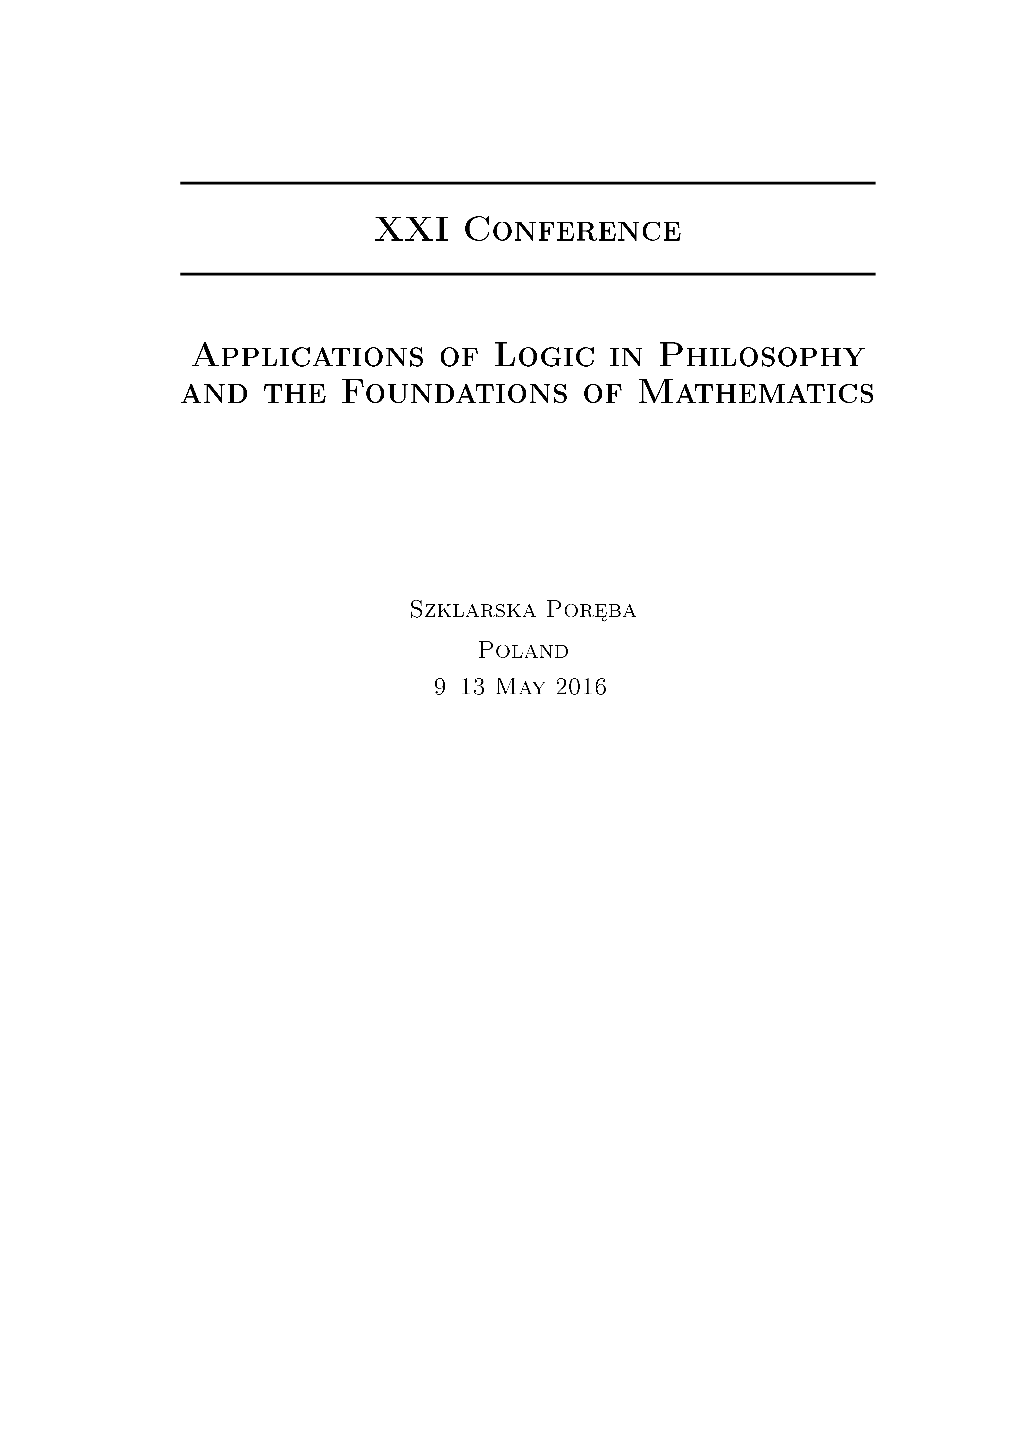 XXI Conference Applications of Logic in Philosophy and the Foundations of Mathematics